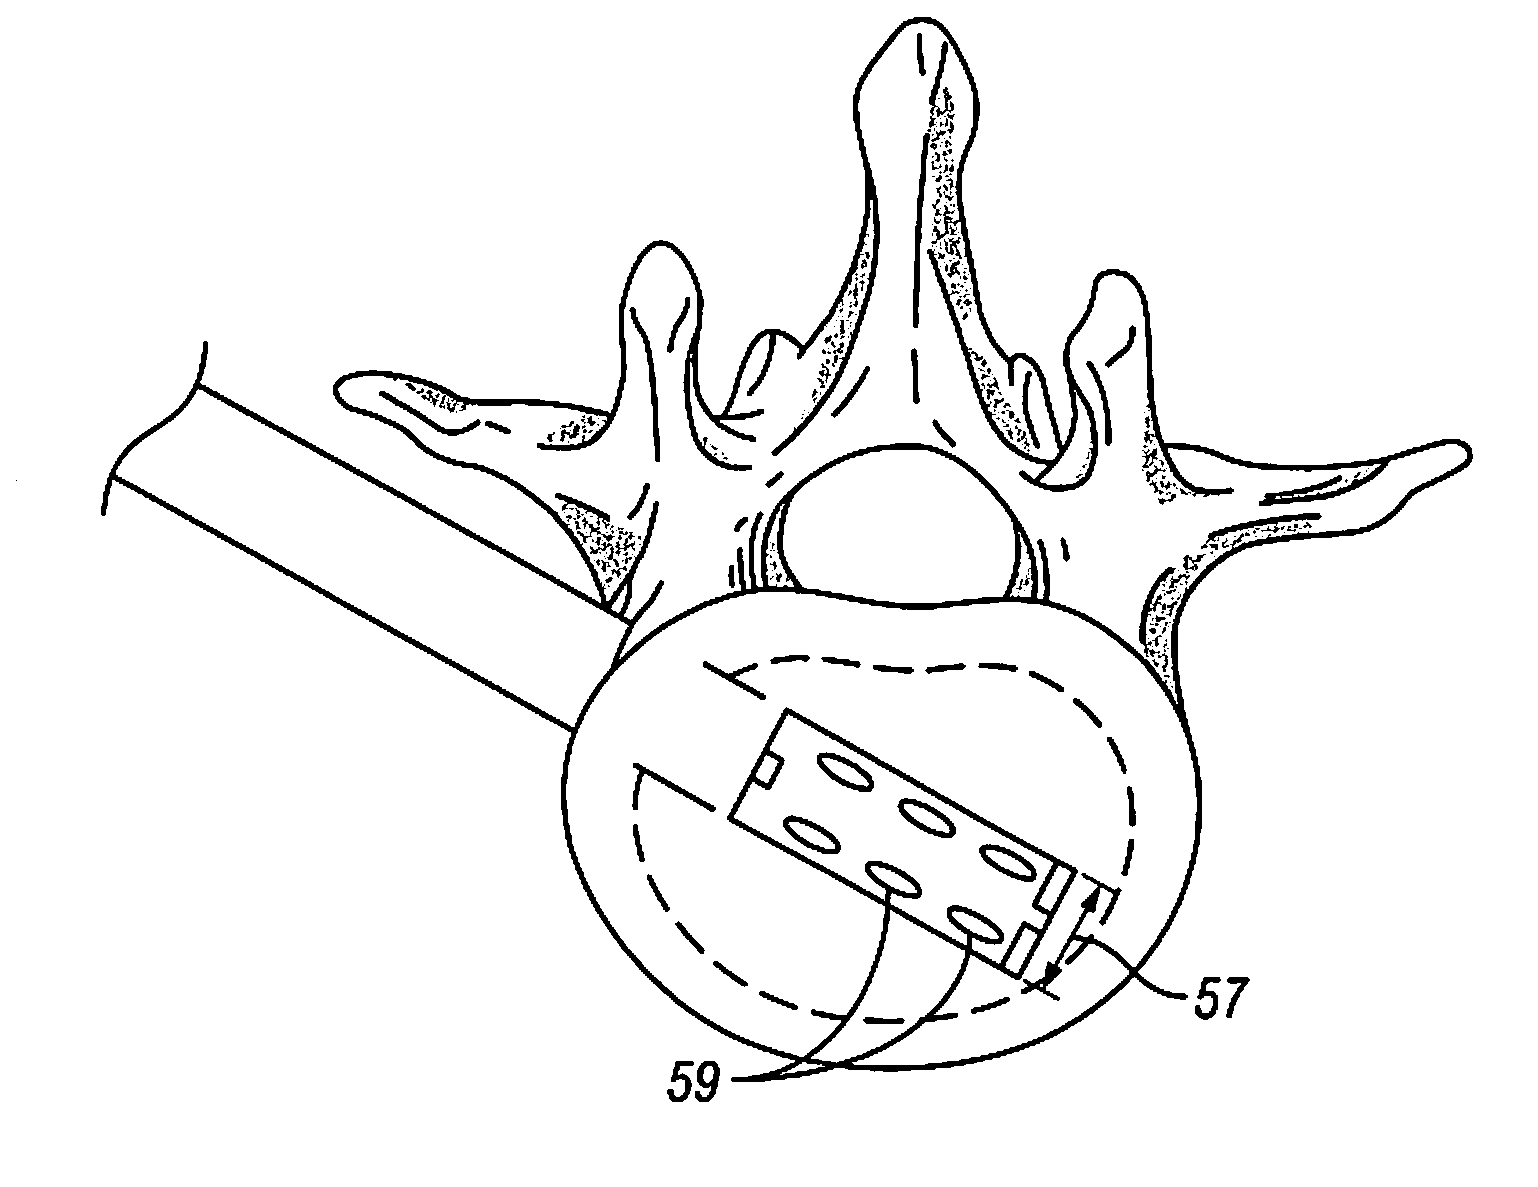 Devices and Methods for Treating Bone